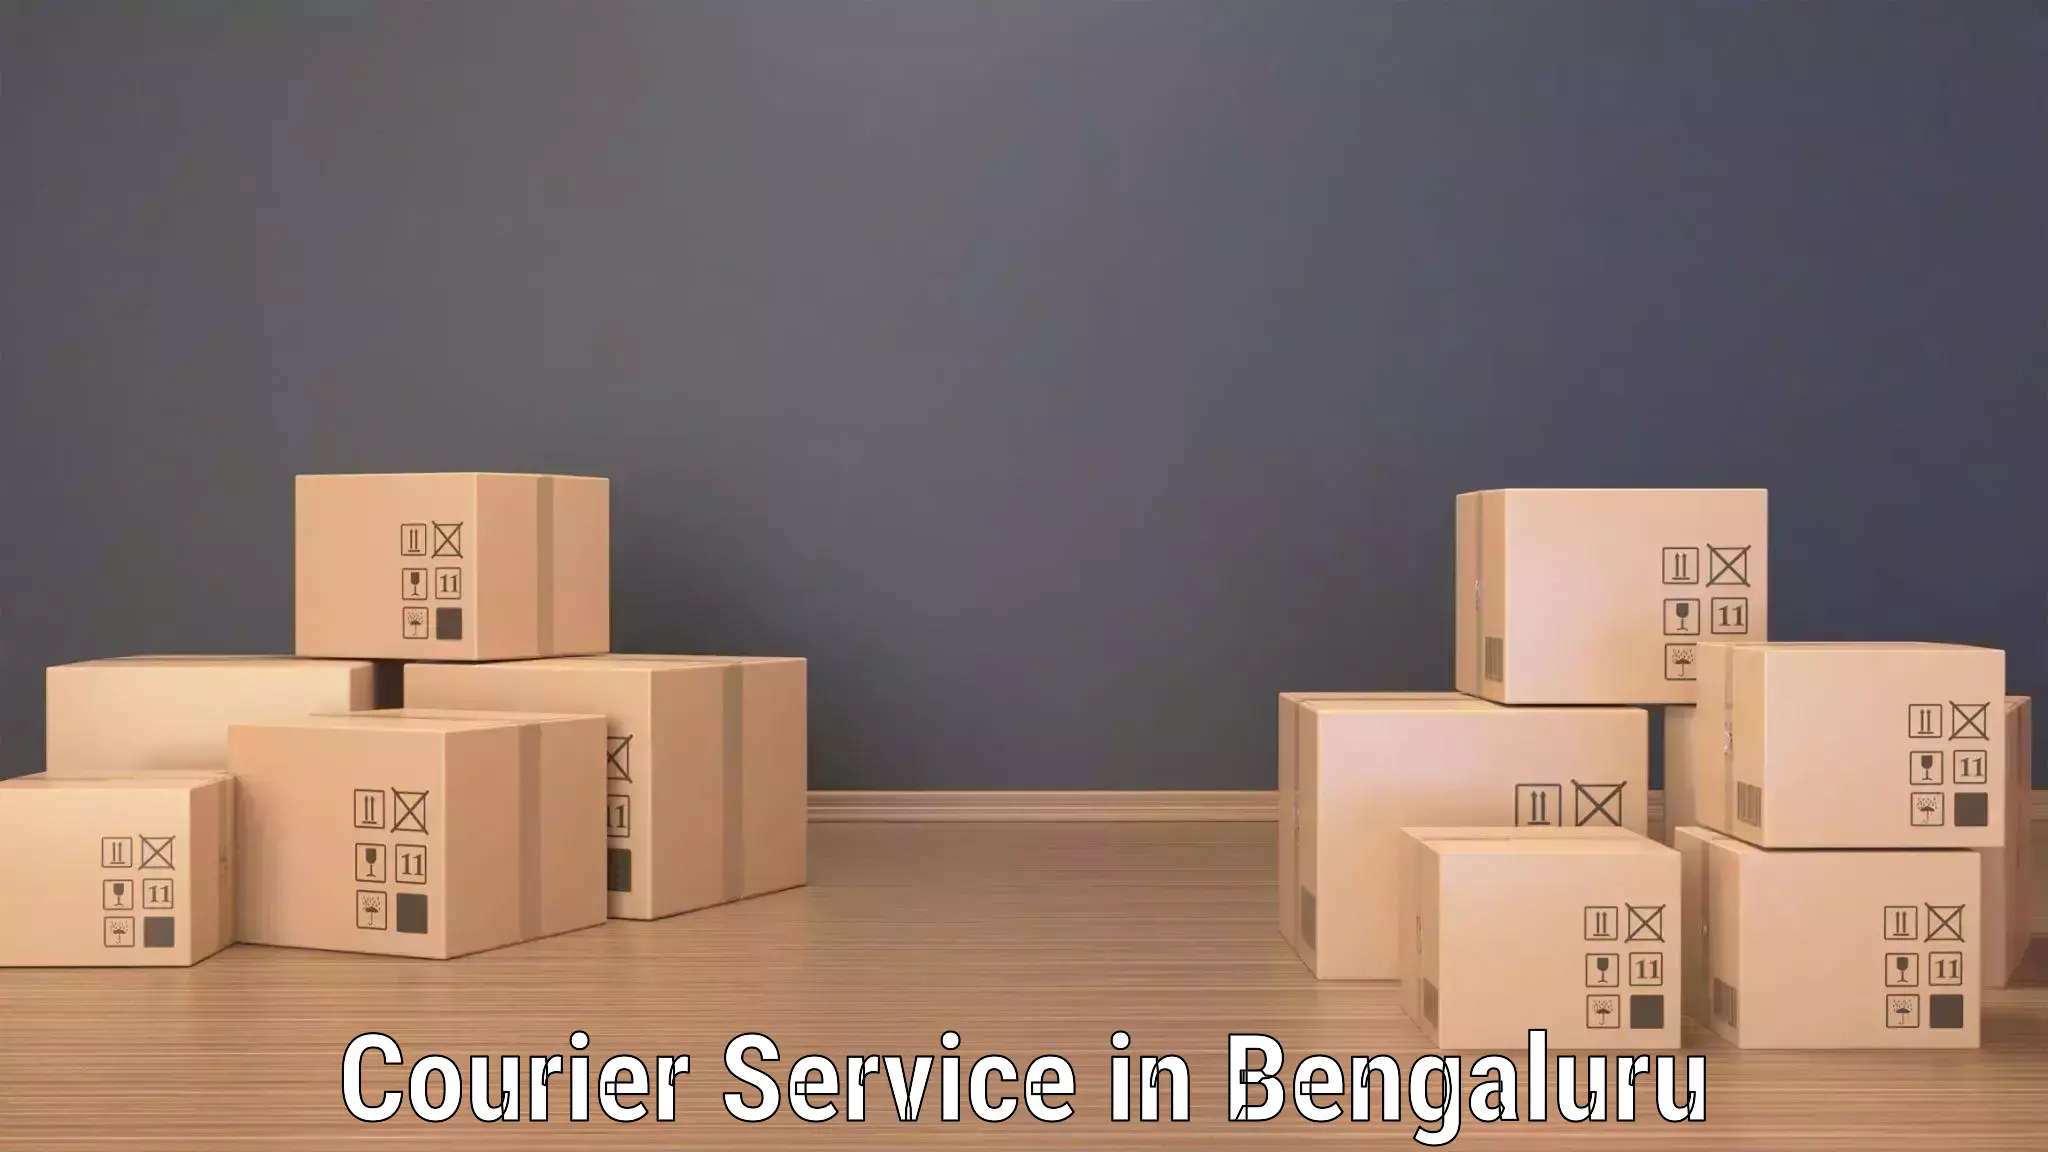 On-demand shipping options in Bengaluru